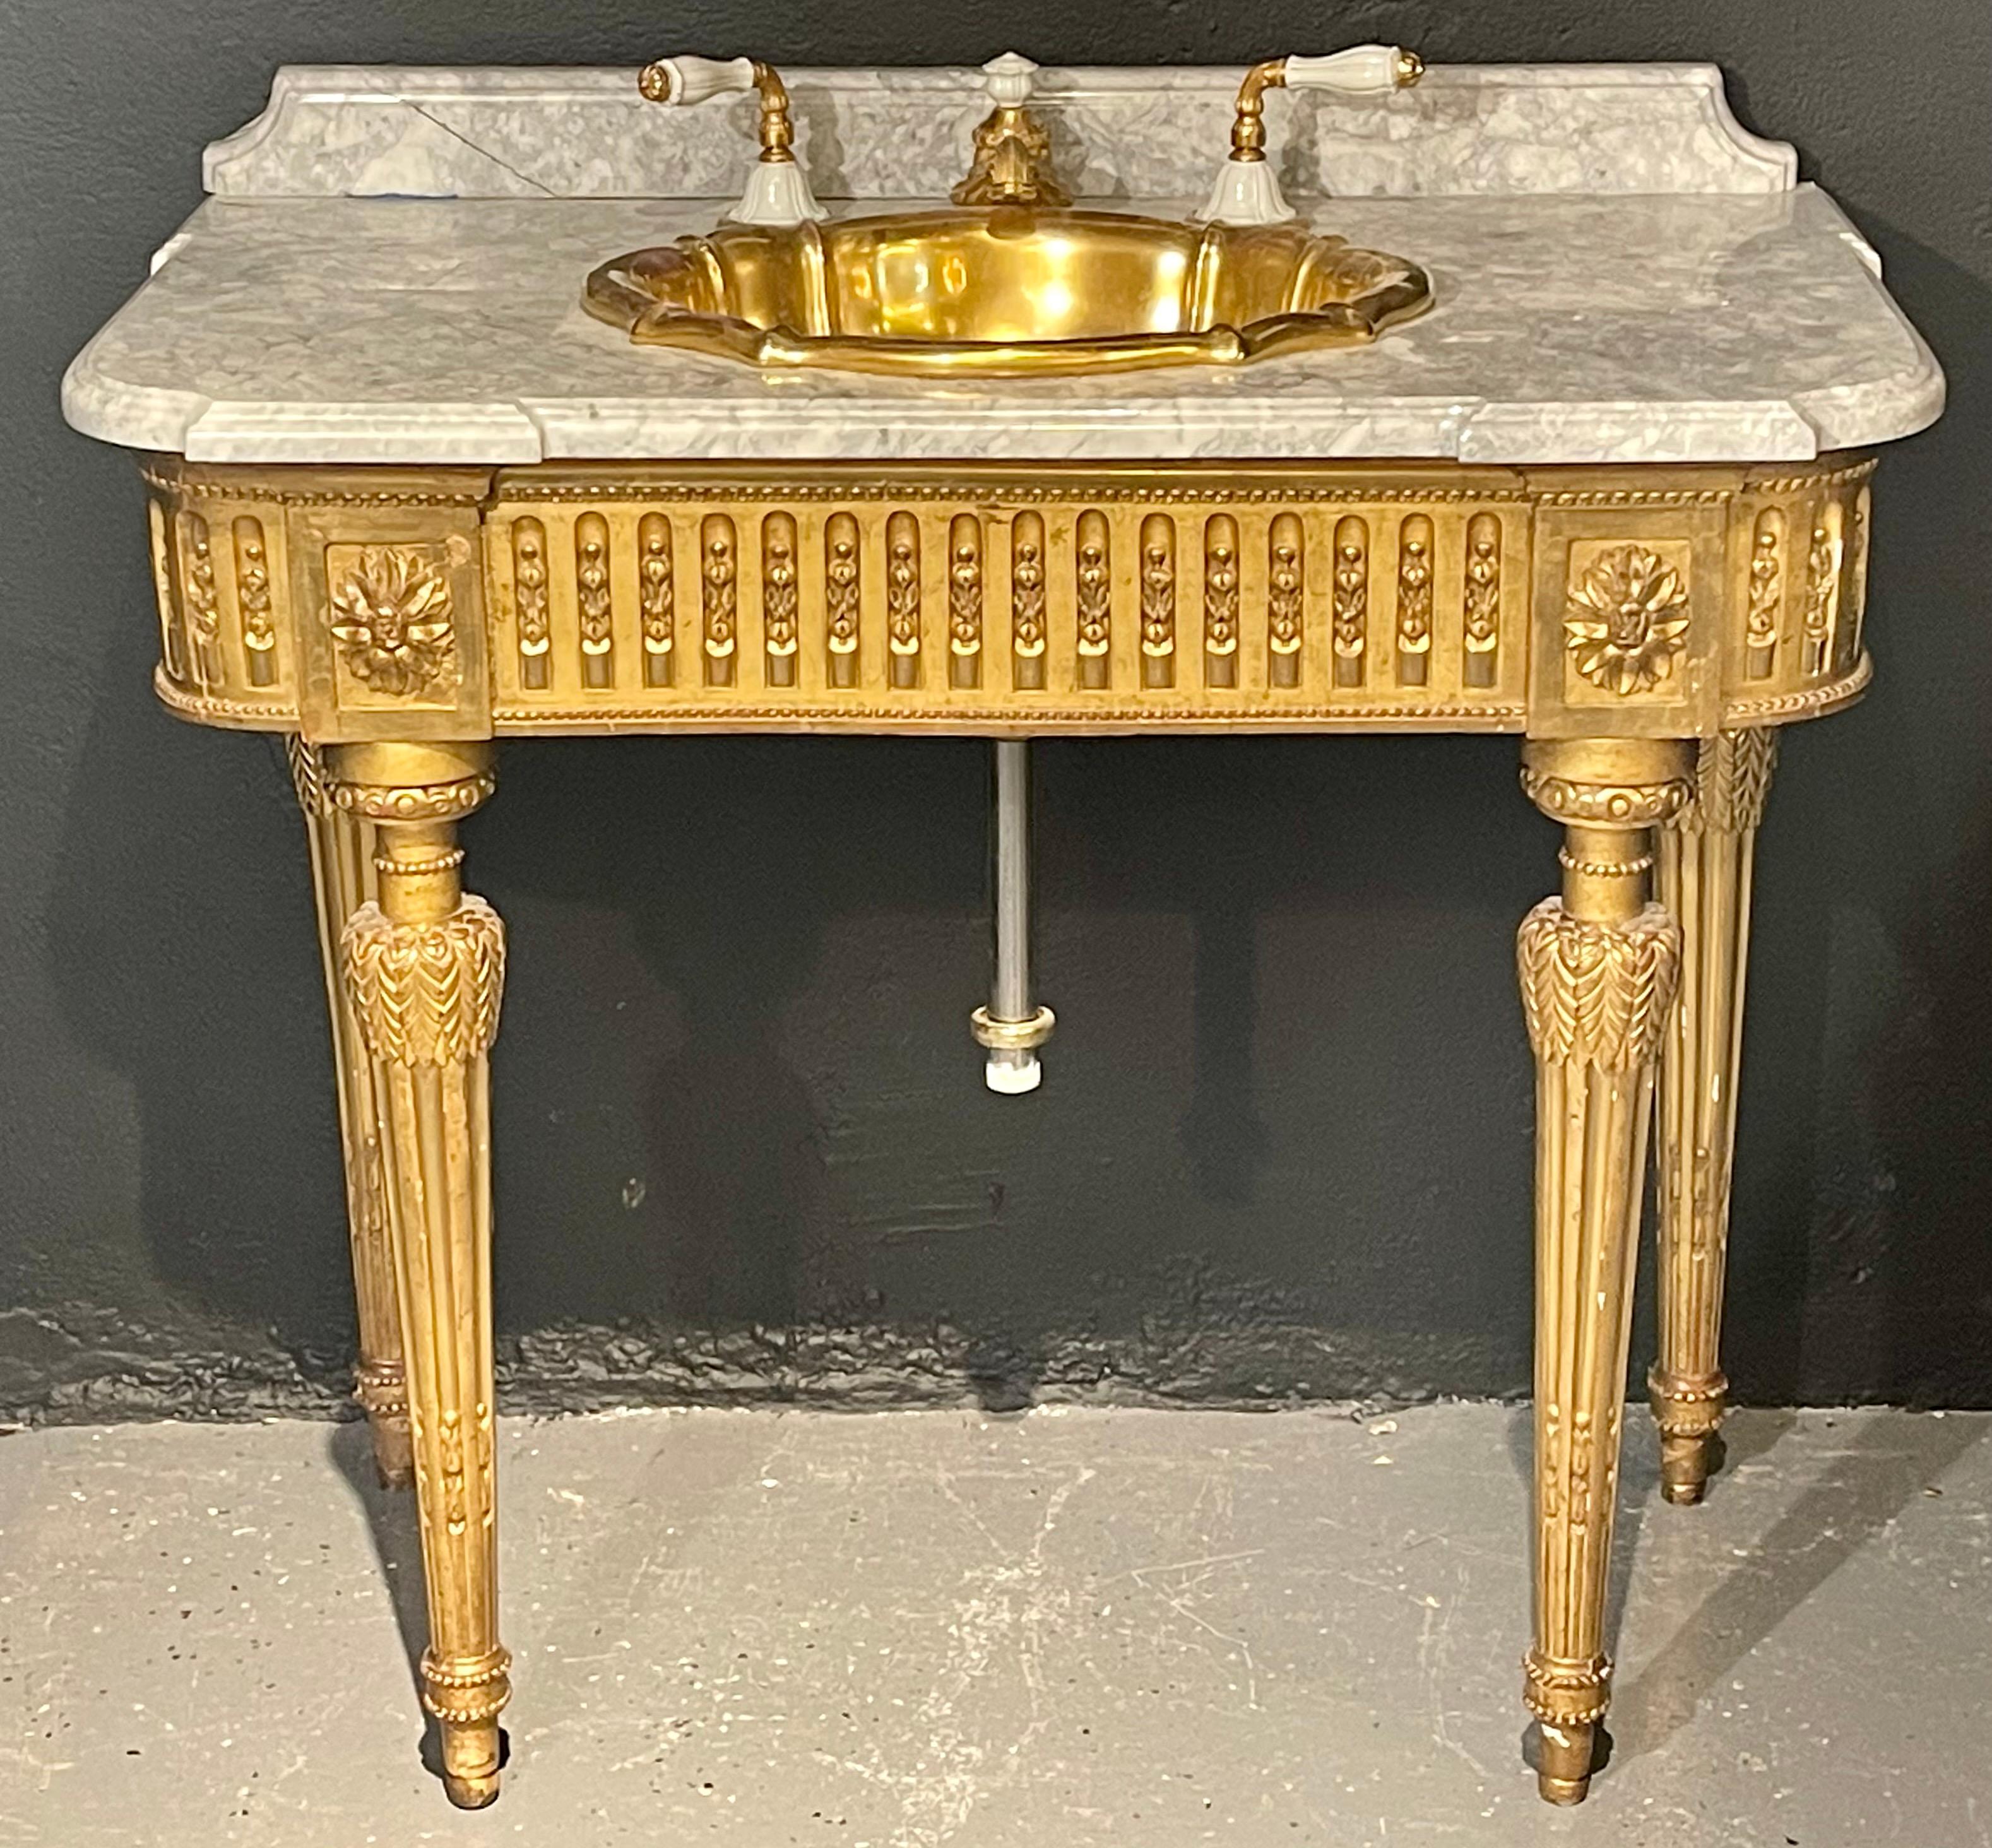 19th century giltwood Louis XVI vanity sink console table. A stunning 19th century console table having a giltwood carved case supporting a think white and gray veined marble top. The finely gilt carved base sitting on four legs leading to a marble